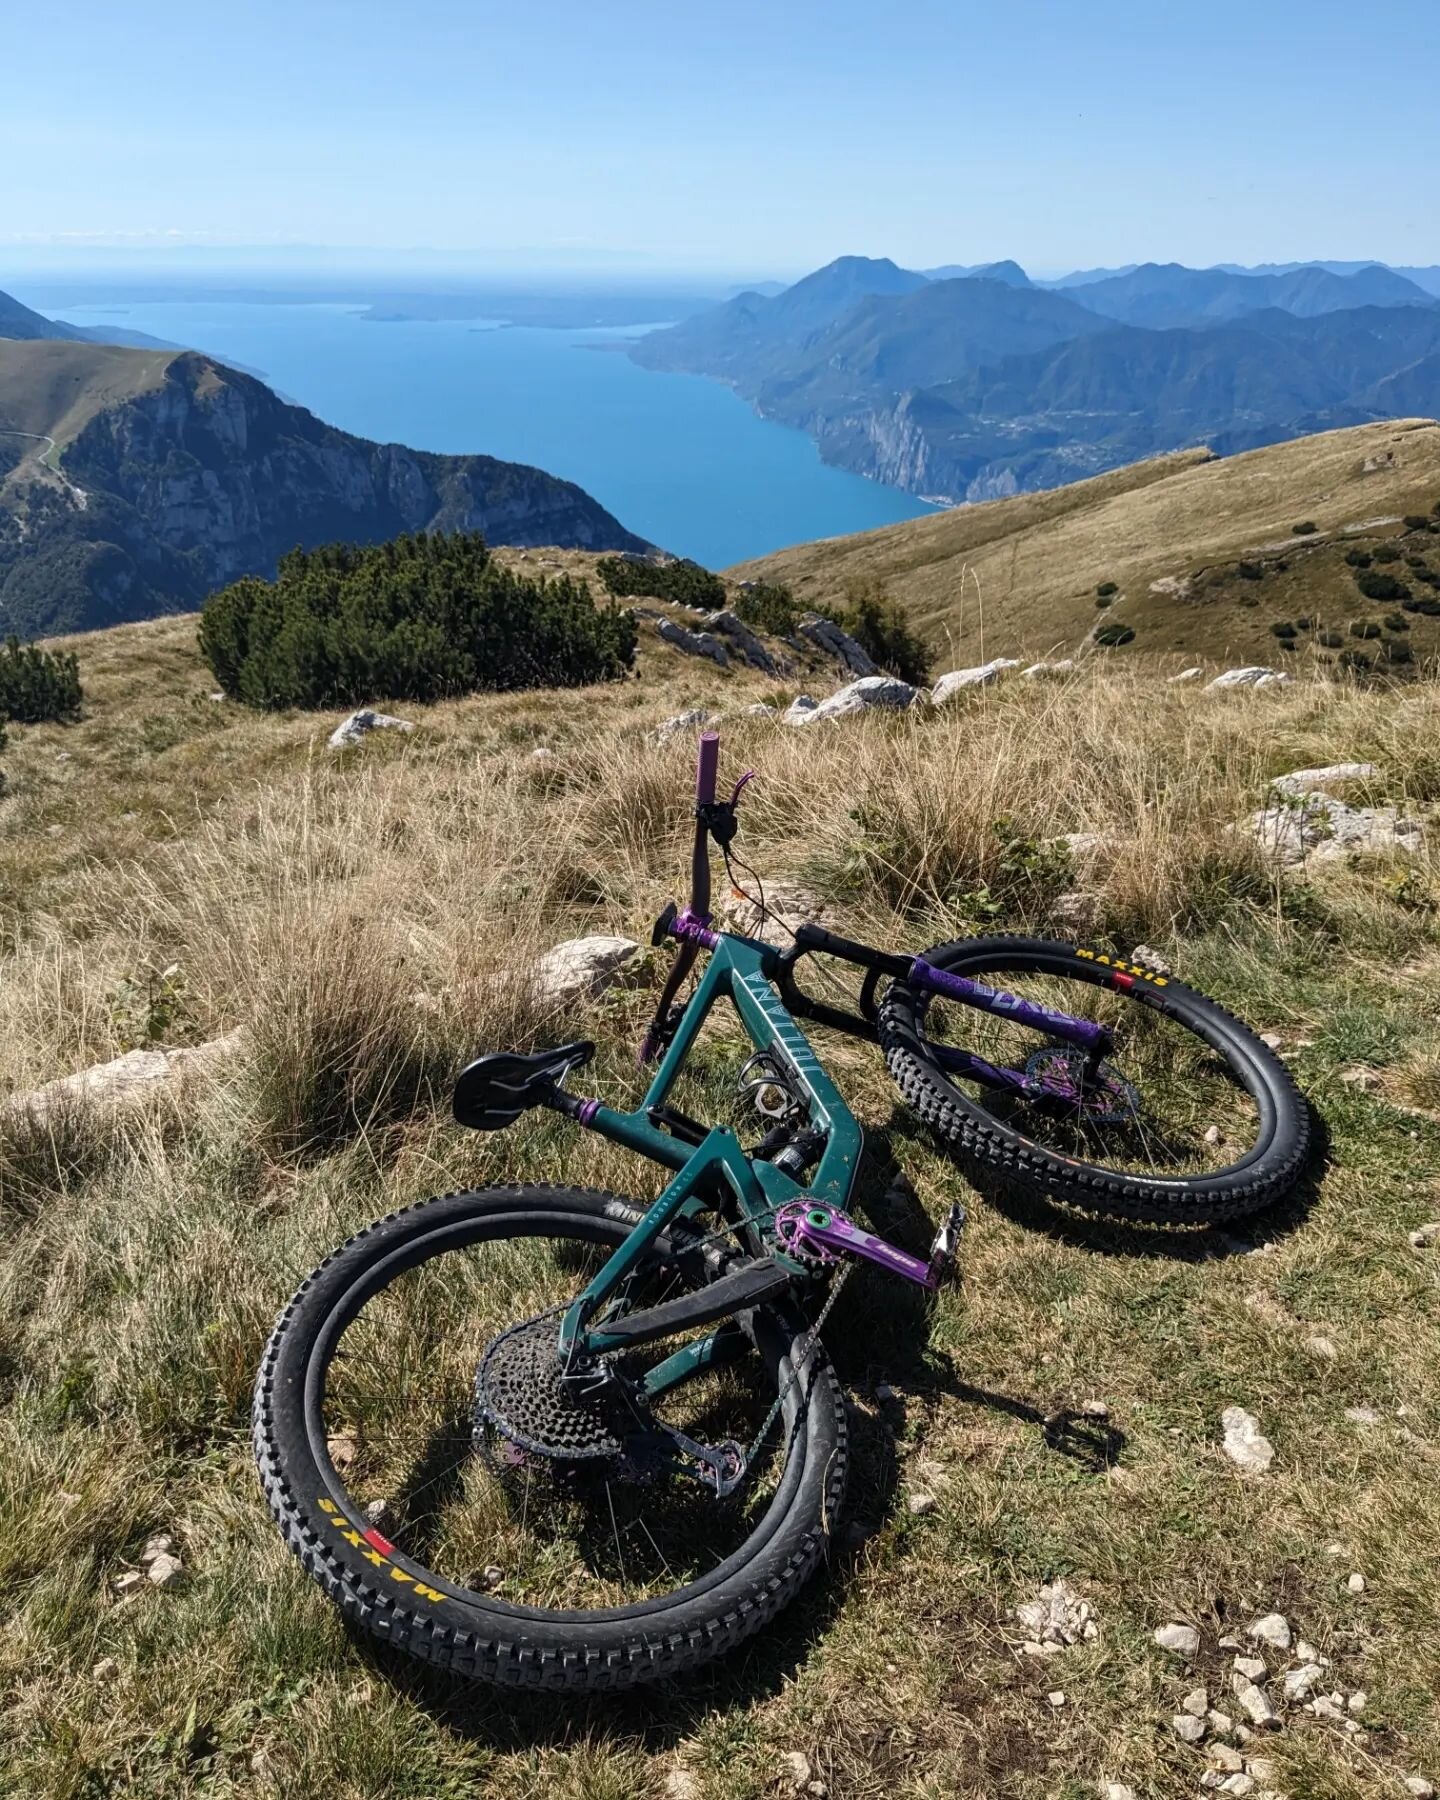 Another week, another Lake to Lake trip is go! And we even got some sunshine today, whoop!
Mega views, rocky trail fun, and drinks by Lake Garda to finish, a good start to the week!

#laketolake #lagodigarda #lakegardamtb #endlesstrailsmtb